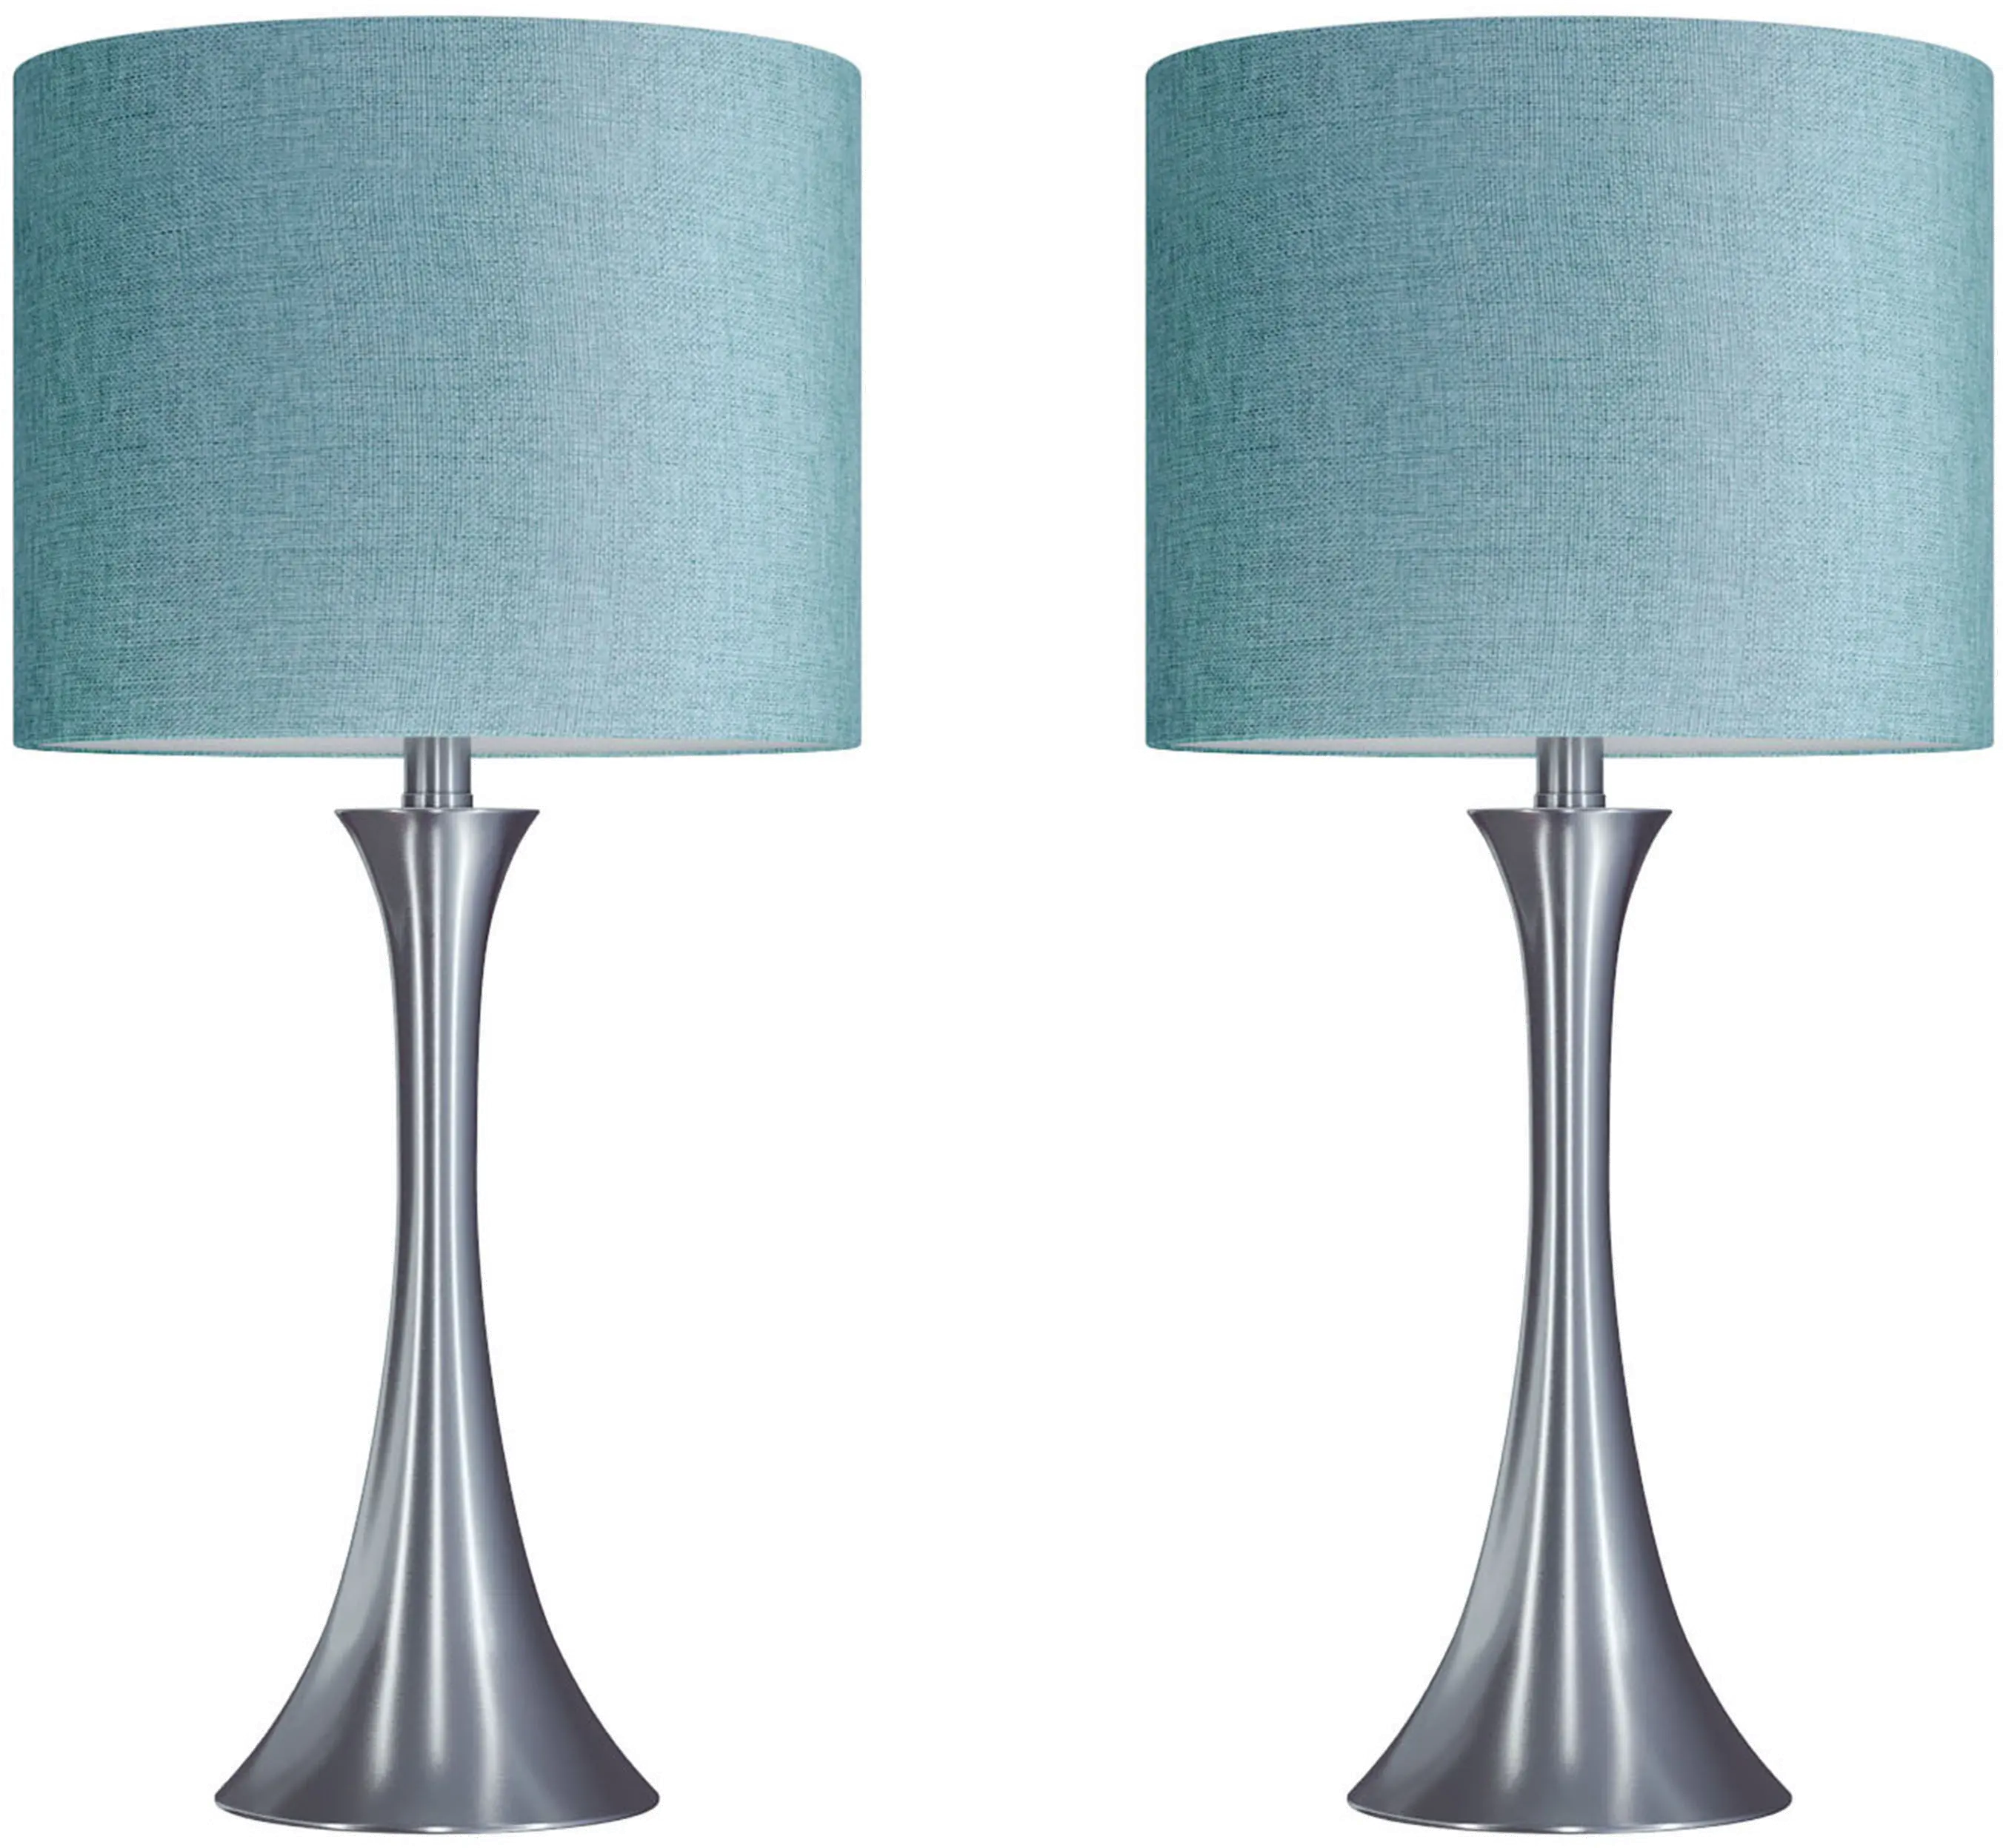 Lenuxe Nickel Table Lamps with Turquoise Shades, Set of 2